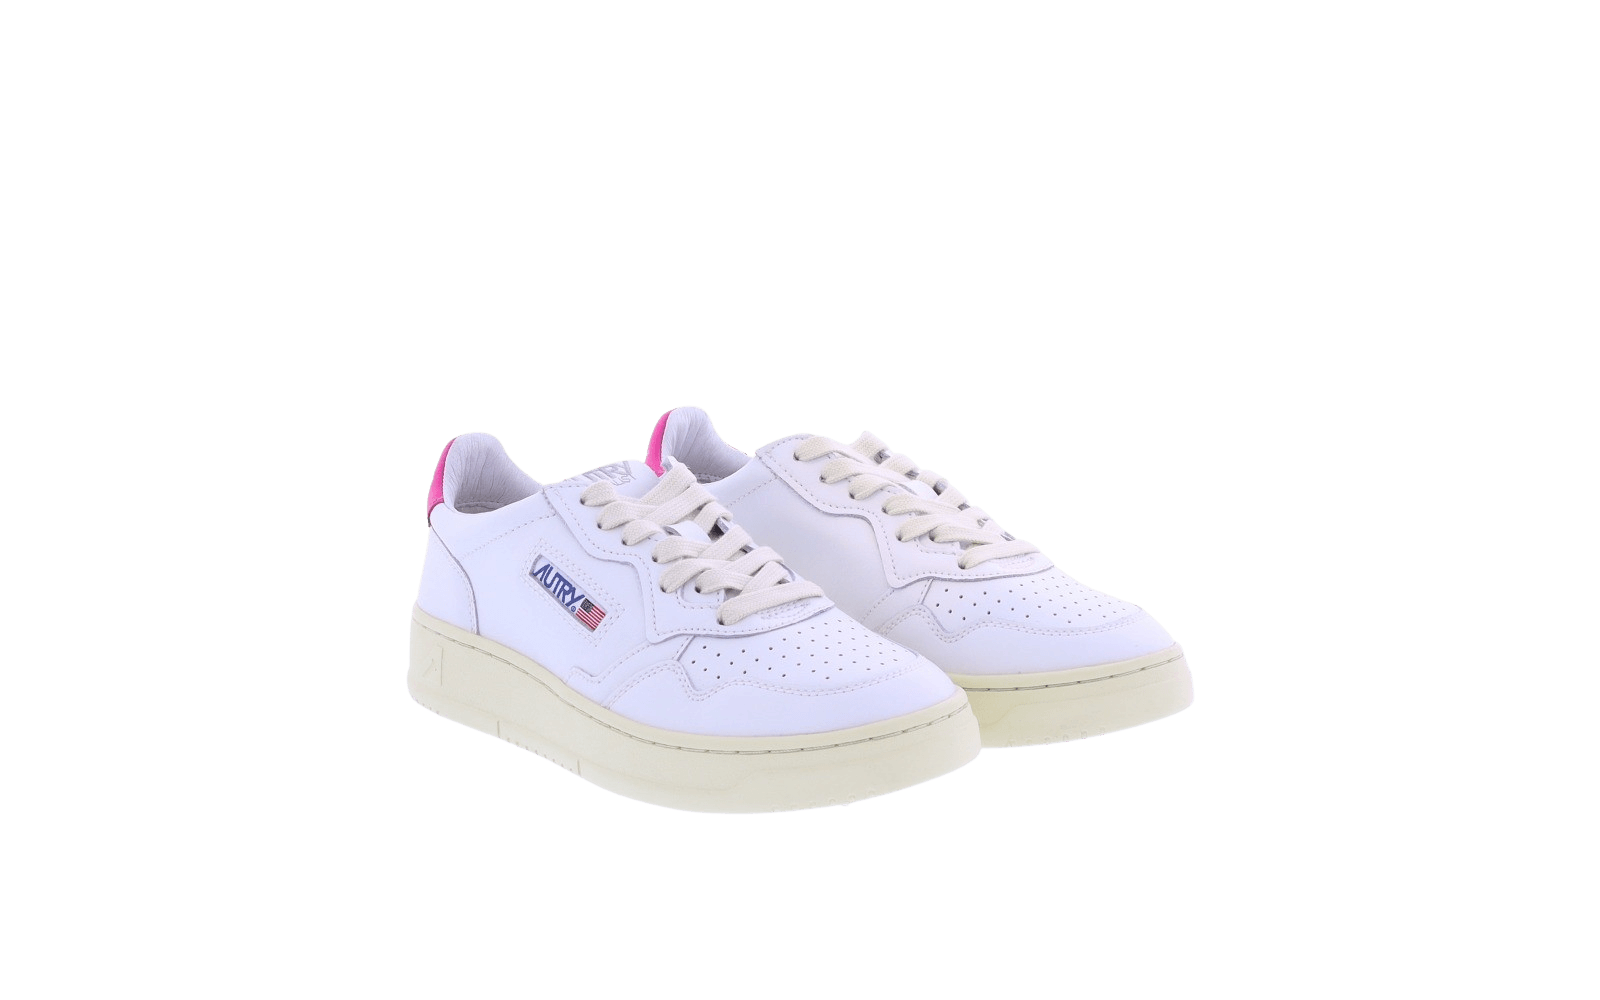 Dames Autry 01 Low wit/hotpink